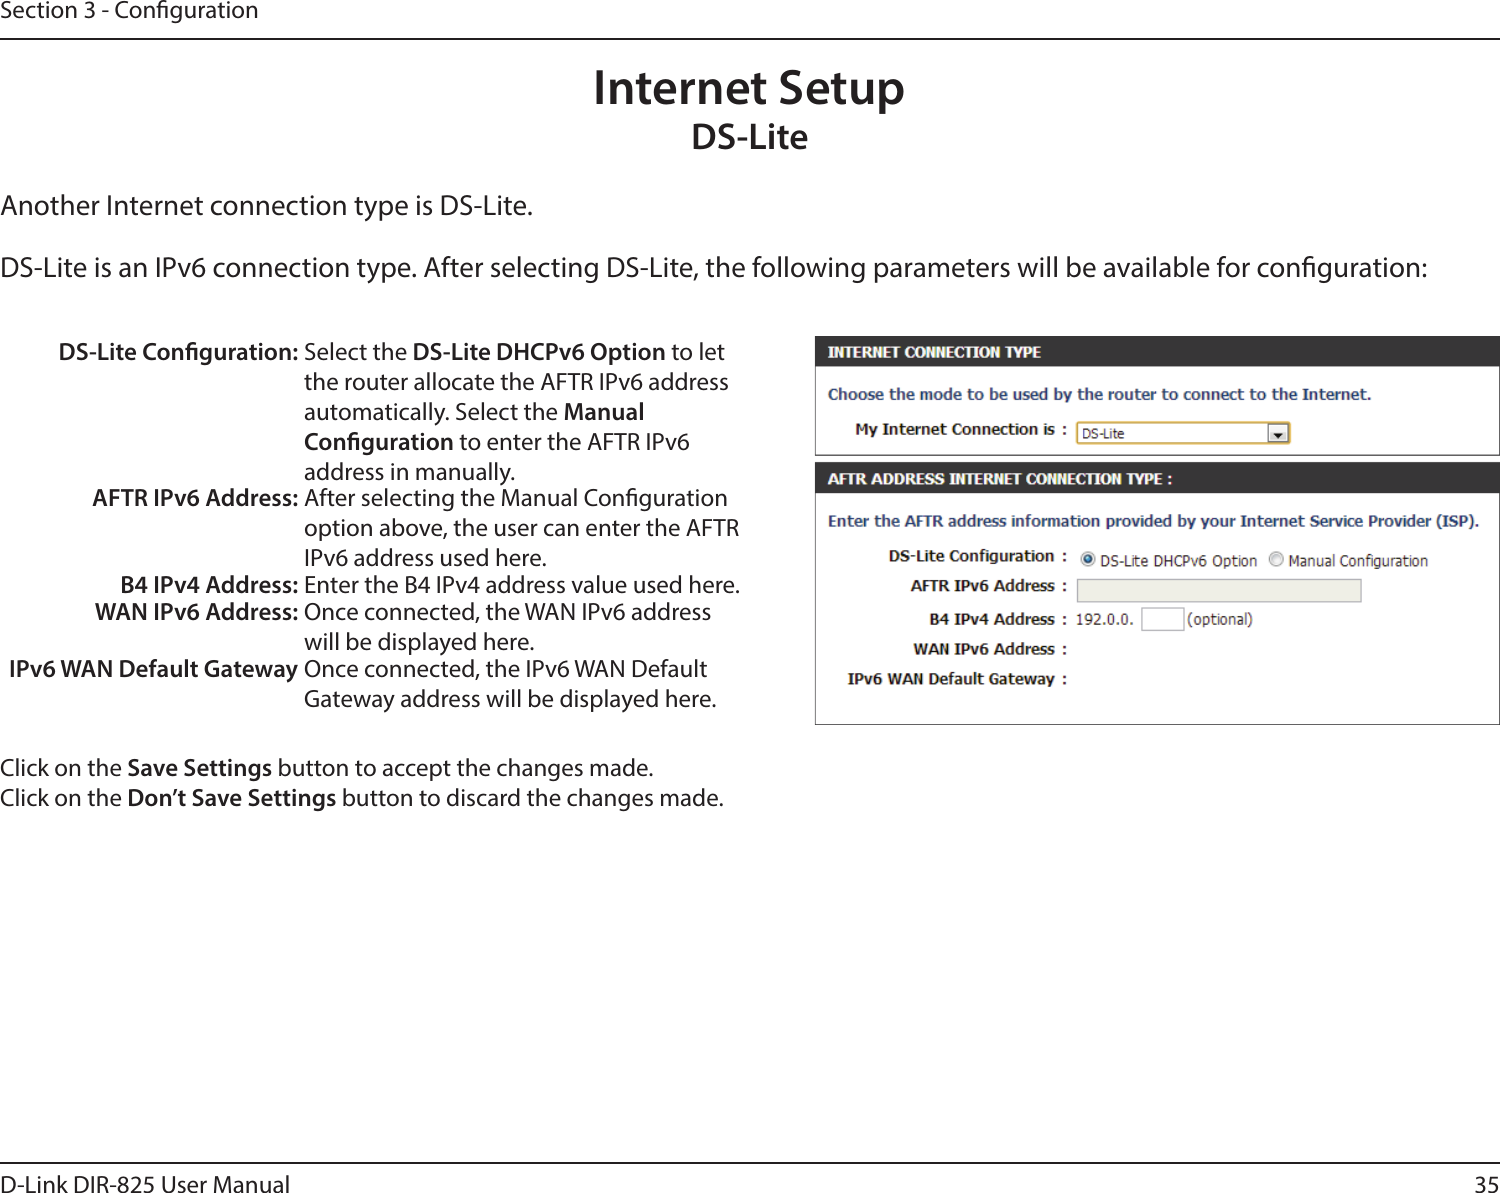 35D-Link DIR-825 User ManualSection 3 - CongurationInternet SetupDS-LiteAnother Internet connection type is DS-Lite.DS-Lite is an IPv6 connection type. After selecting DS-Lite, the following parameters will be available for conguration:DS-Lite Conguration: Select the DS-Lite DHCPv6 Option to let the router allocate the AFTR IPv6 address automatically. Select the Manual  Conguration to enter the AFTR IPv6  address in manually.AFTR IPv6 Address: After selecting the Manual Conguration option above, the user can enter the AFTR IPv6 address used here.B4 IPv4 Address: Enter the B4 IPv4 address value used here.WAN IPv6 Address: Once connected, the WAN IPv6 address will be displayed here.IPv6 WAN Default Gateway Once connected, the IPv6 WAN Default Gateway address will be displayed here.Click on the Save Settings button to accept the changes made.Click on the Don’t Save Settings button to discard the changes made.